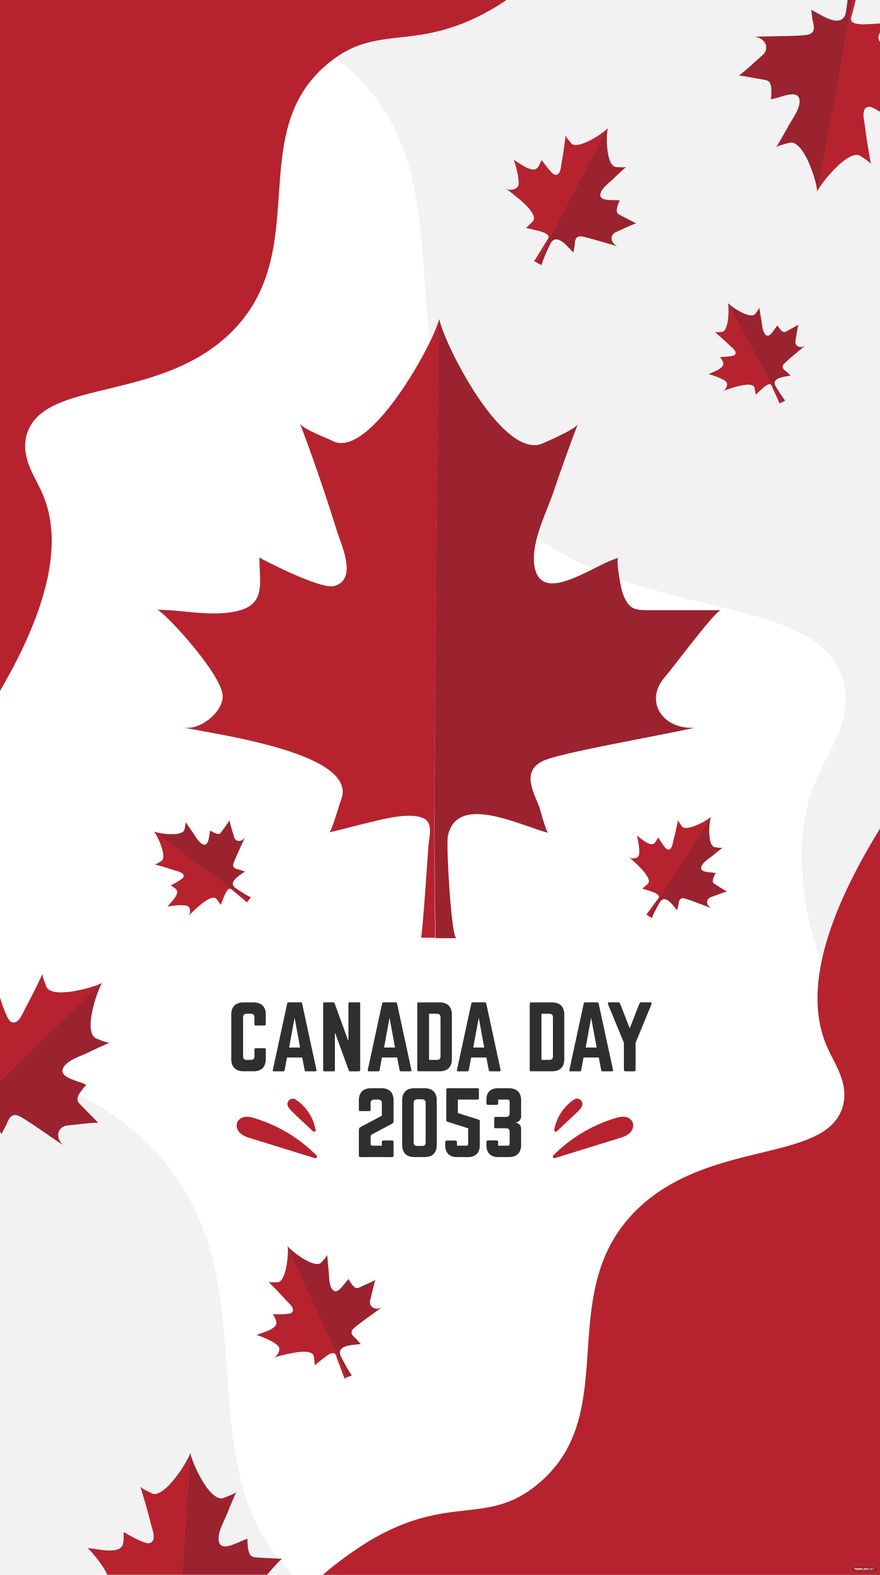 Free Canada Day Iphone Wallpaper in Illustrator, EPS, SVG, JPG, PNG